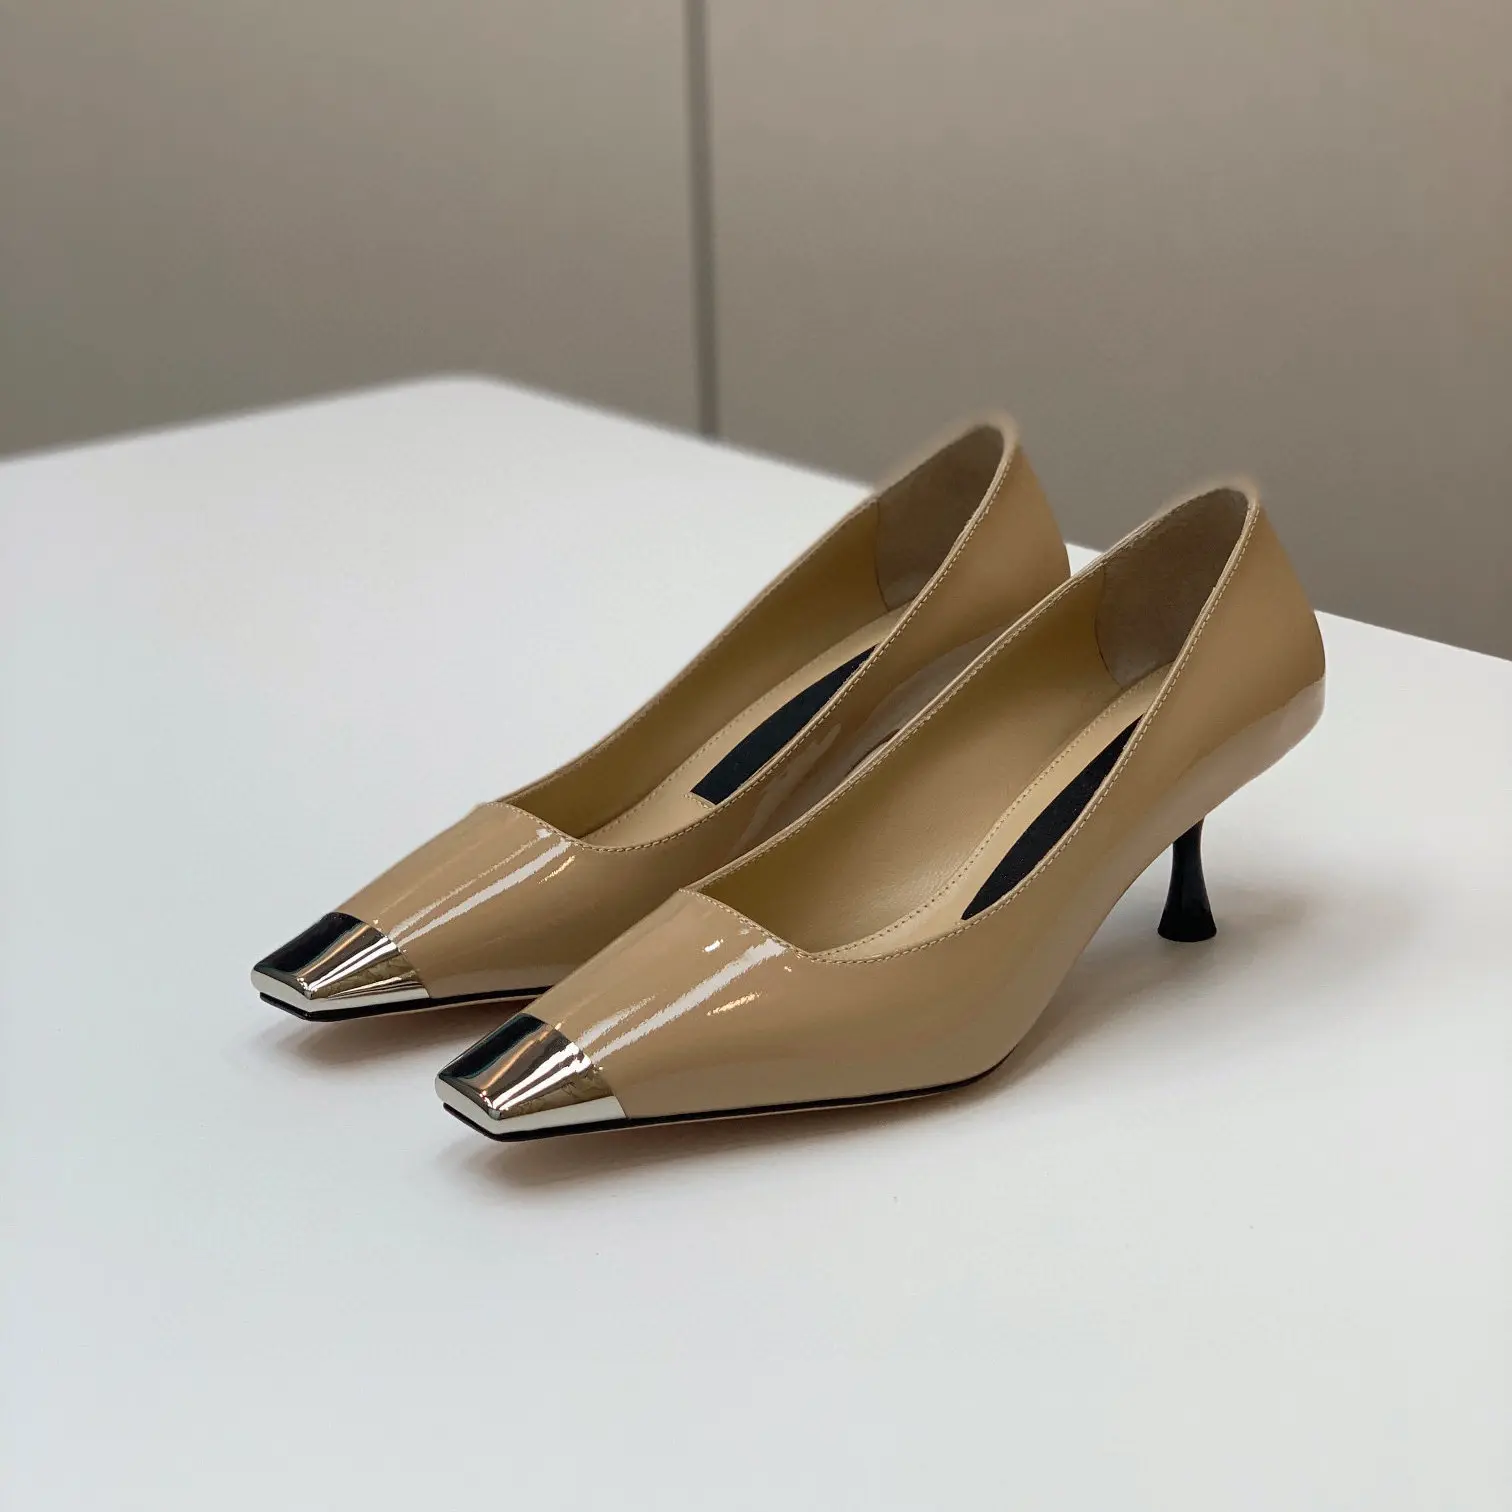 

Casual Designer Fashion Women Shoes Office Lady Apricot Black Genuine Leather Metal Point Toe High heels Stiletto Heeled Pumps